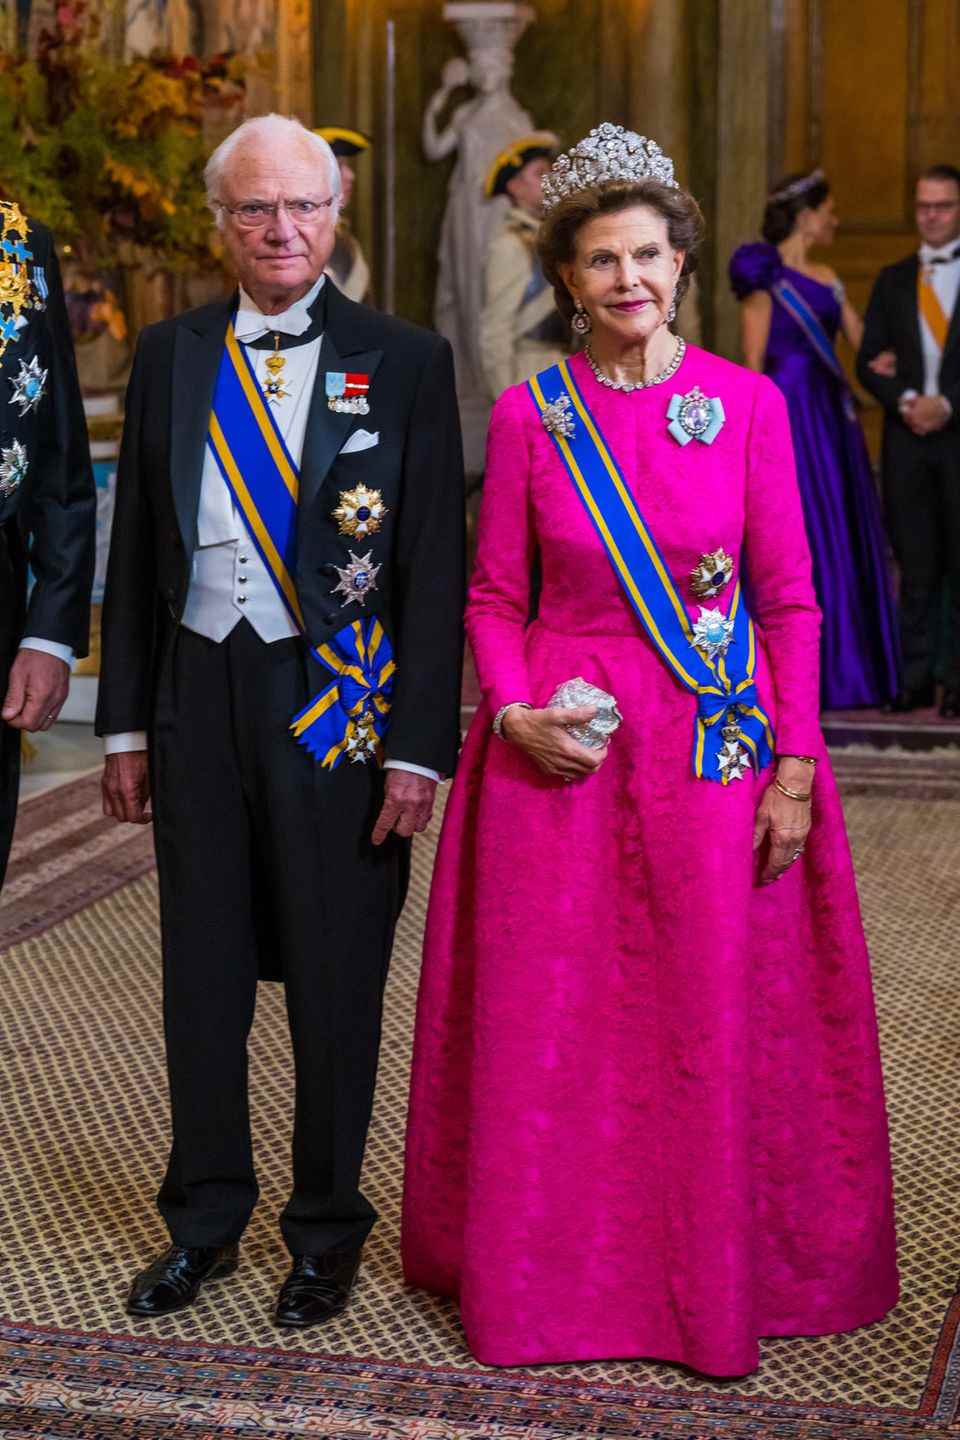 Queen Silvia at the state banquet in bright pink